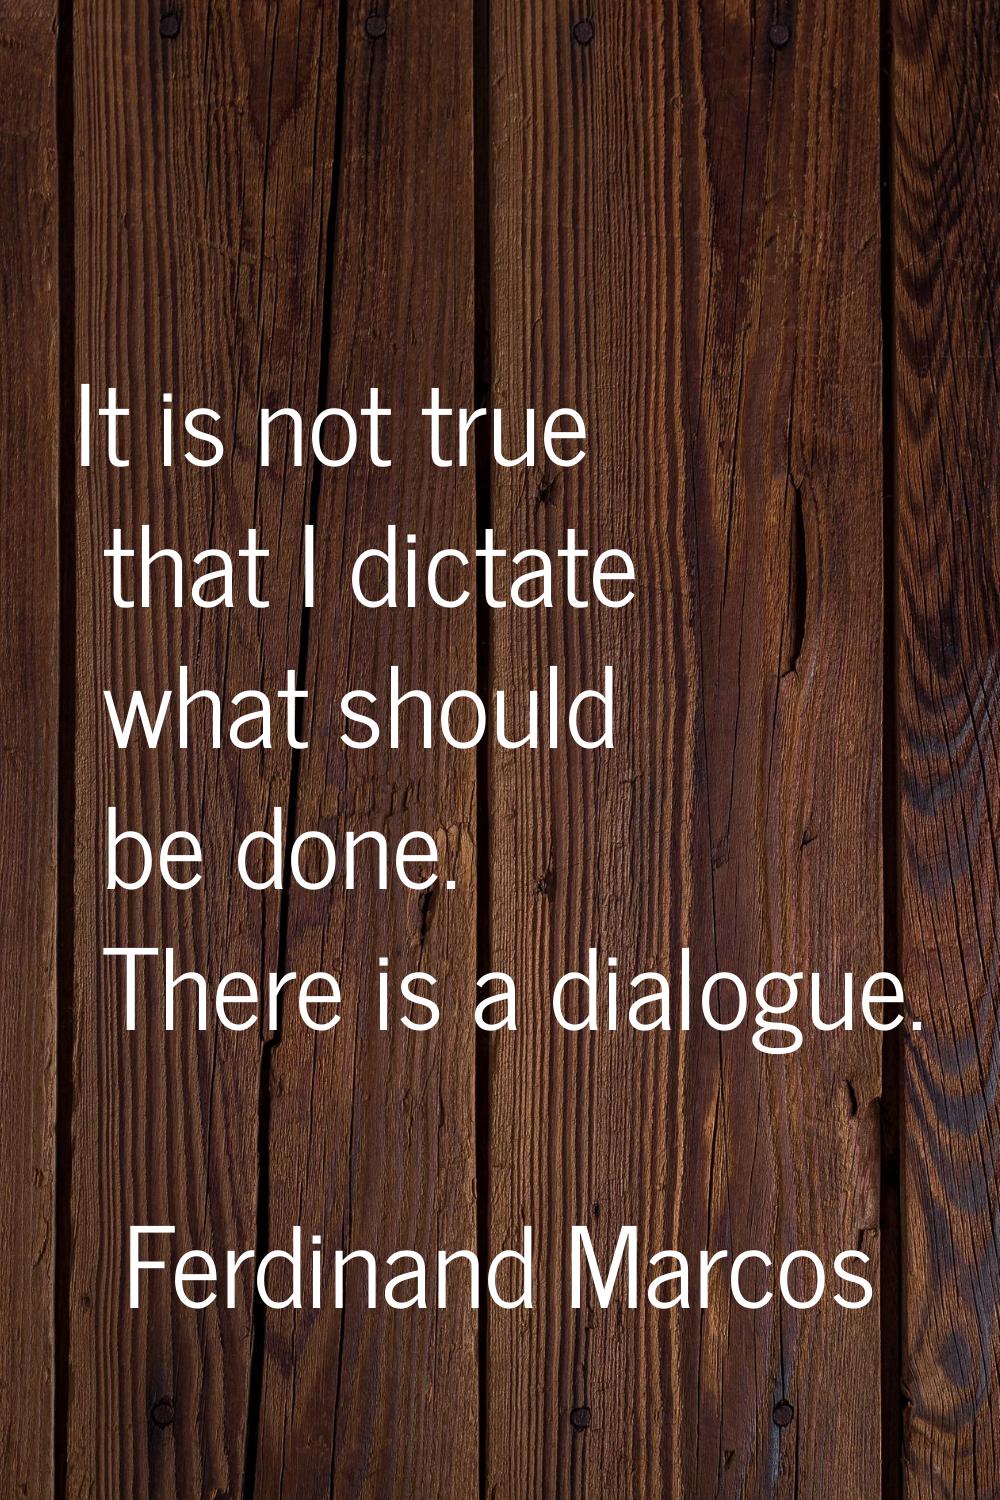 It is not true that I dictate what should be done. There is a dialogue.